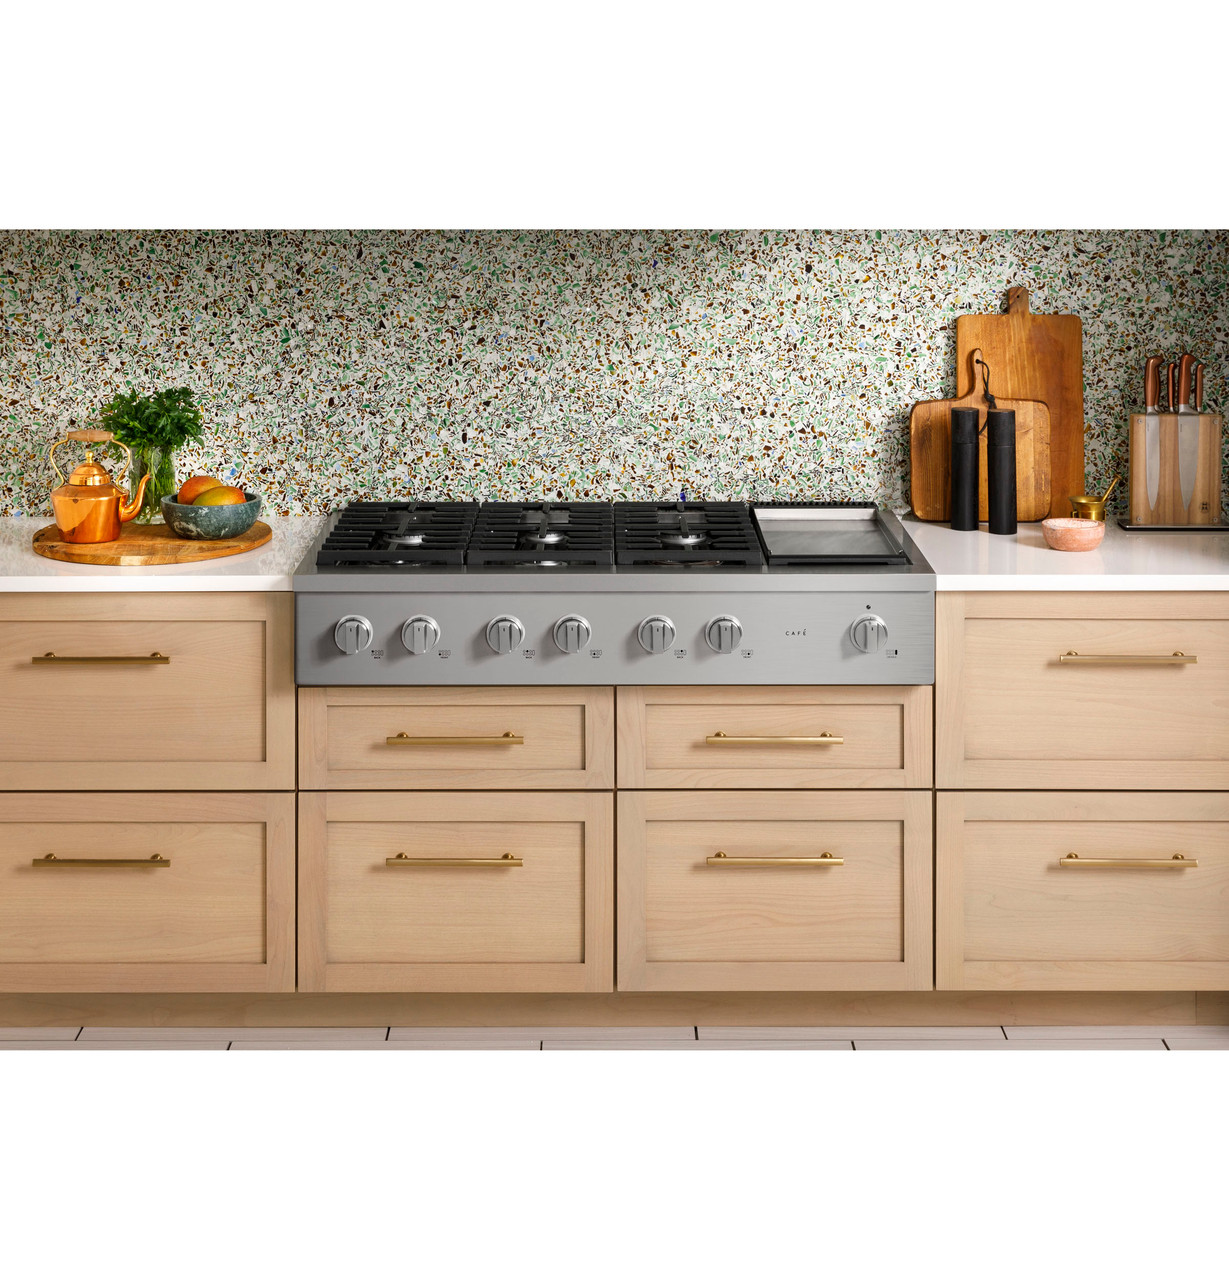 Cafe - CGU486P2TS1 - Café™ 48 Commercial-Style Gas Rangetop with 6 Burners  and Integrated Griddle (Natural Gas)-CGU486P2TS1